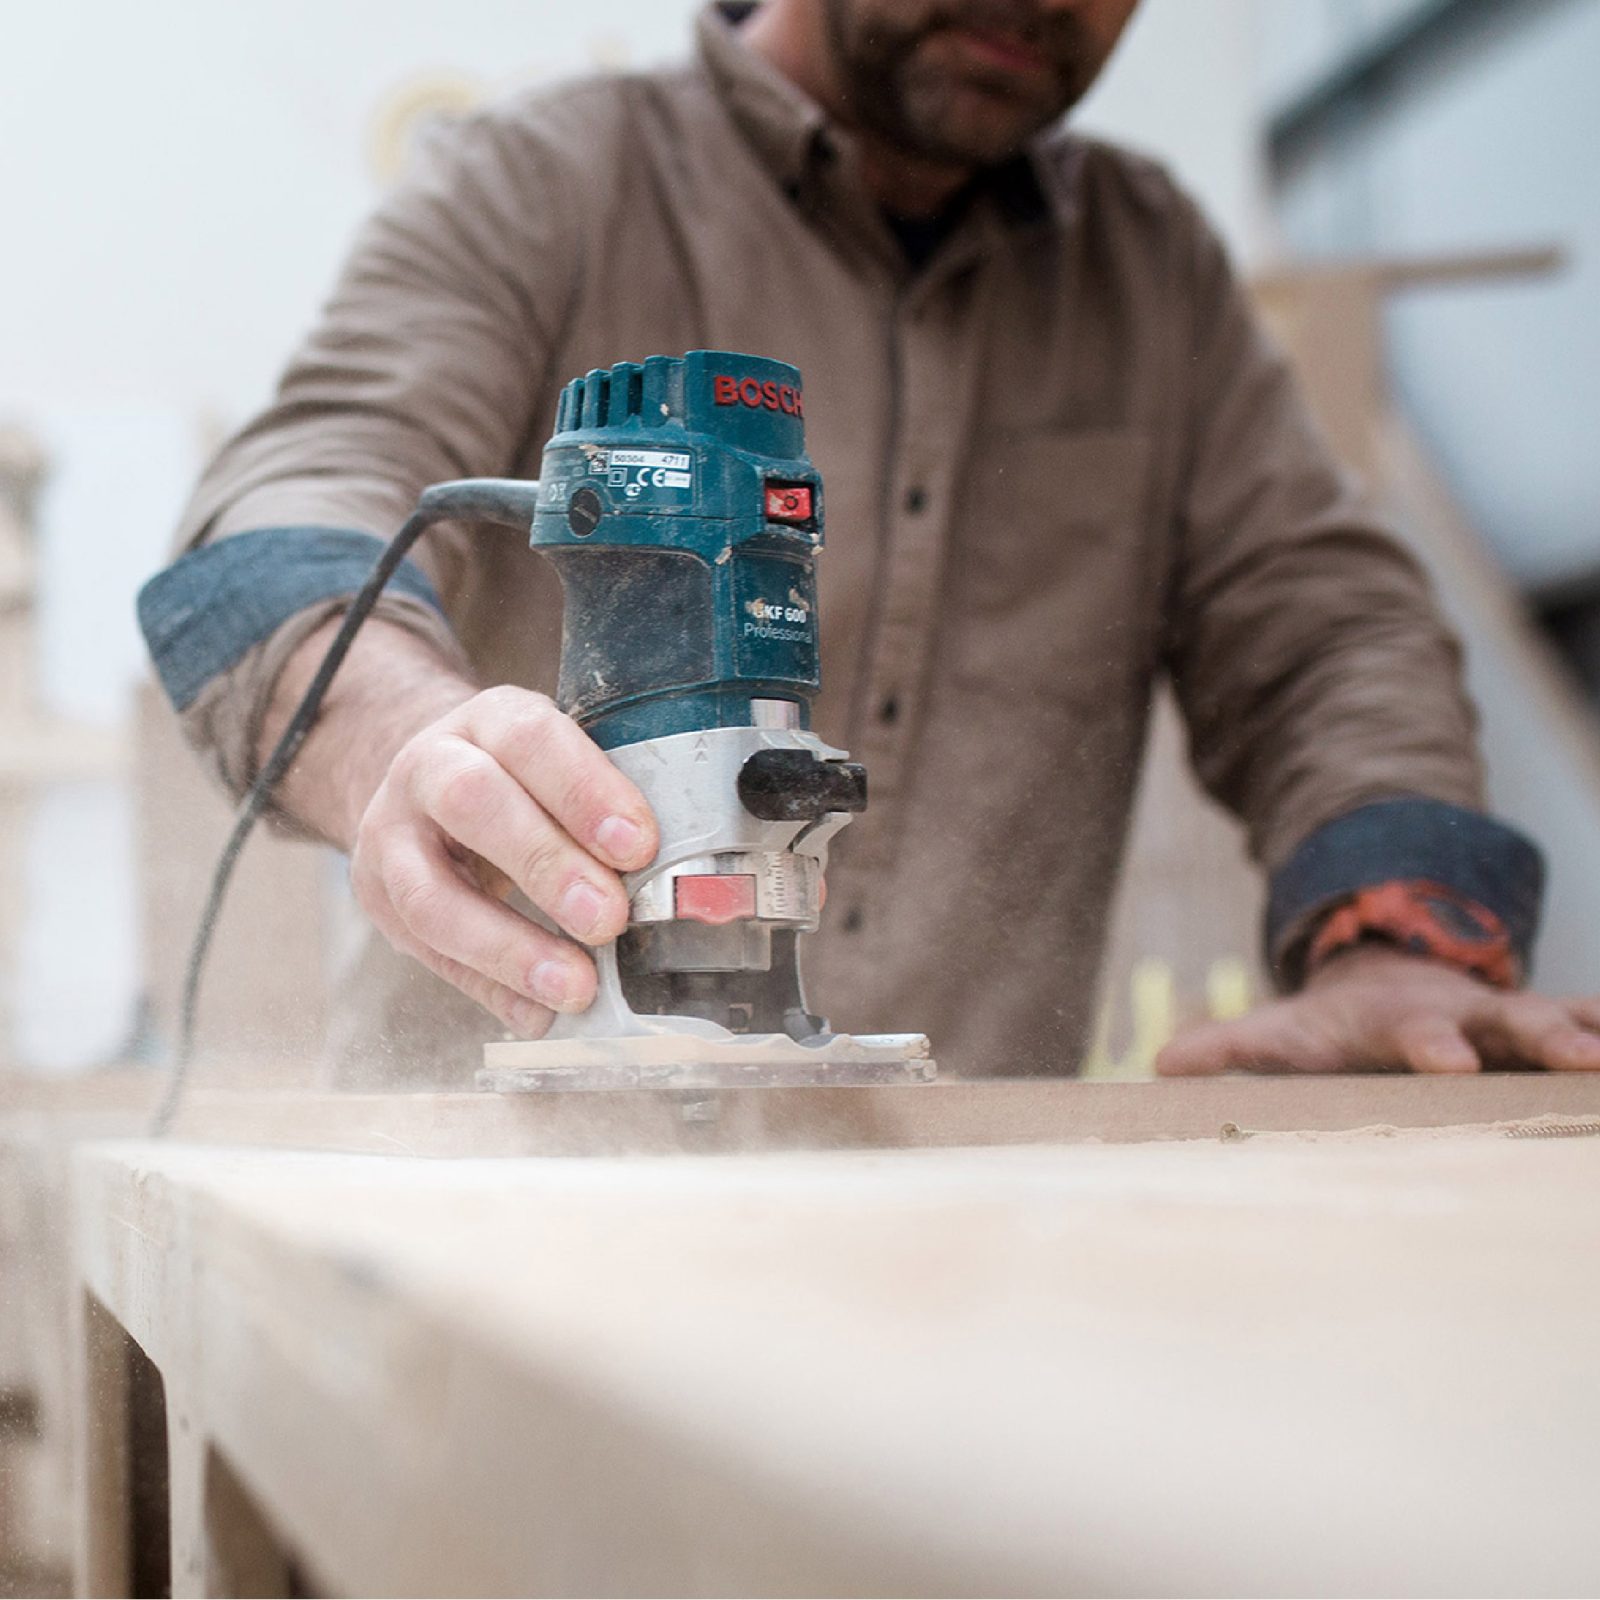 A man using a blue Bosch power tool to sand a wooden board in a workshop, with sawdust visible in the air. Focus on the hands and the tool.